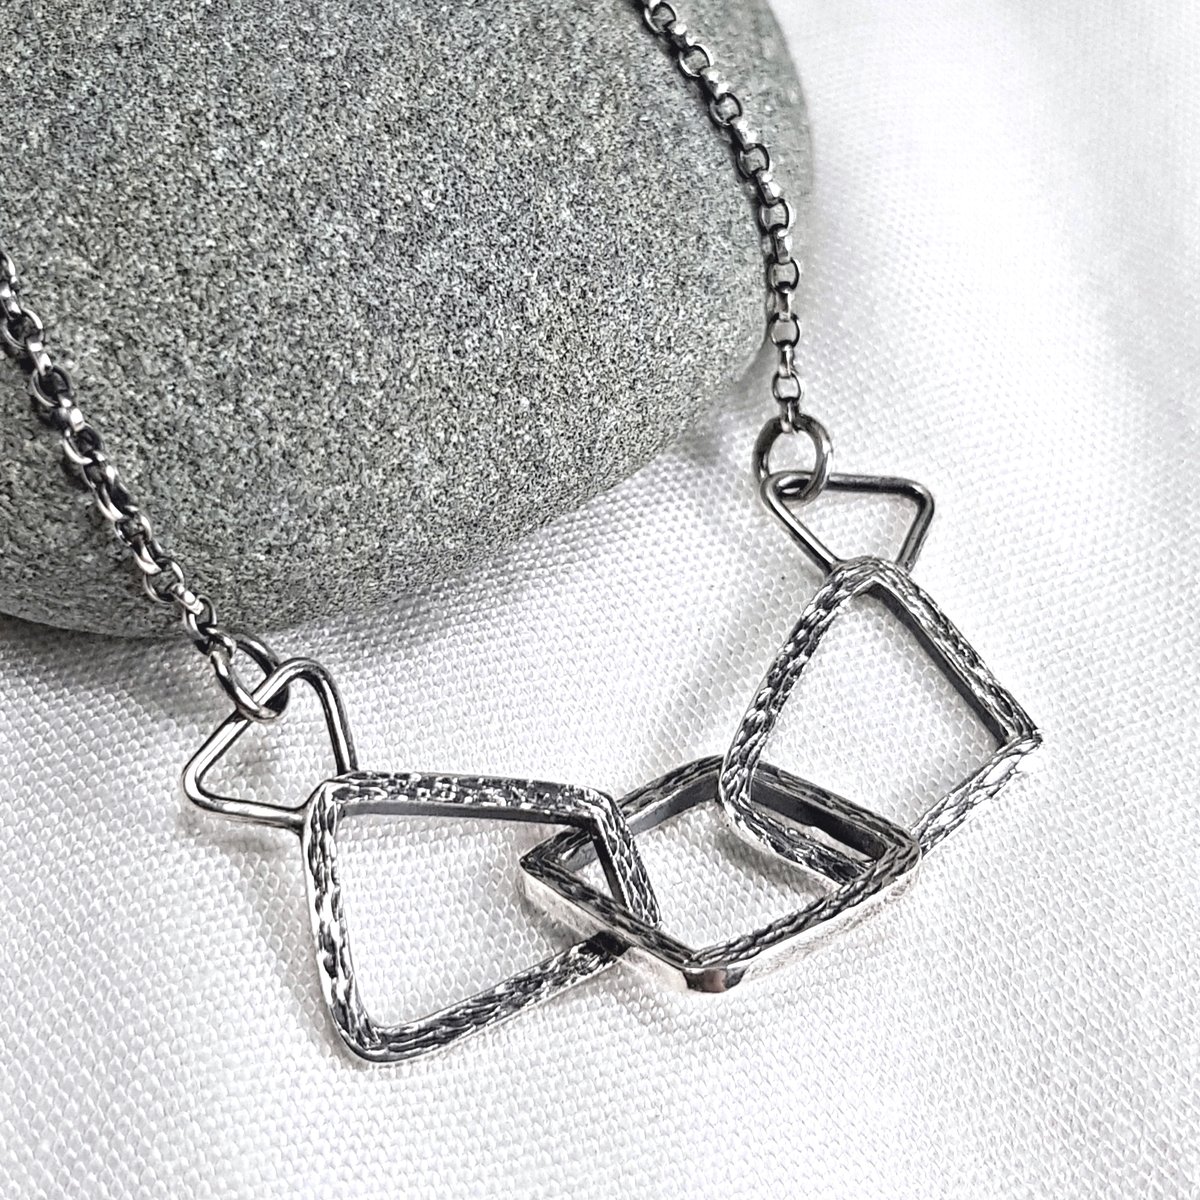 Image of Chunky Sterling Silver Necklace, Handmade Geometric Link Chain, Statement Necklace